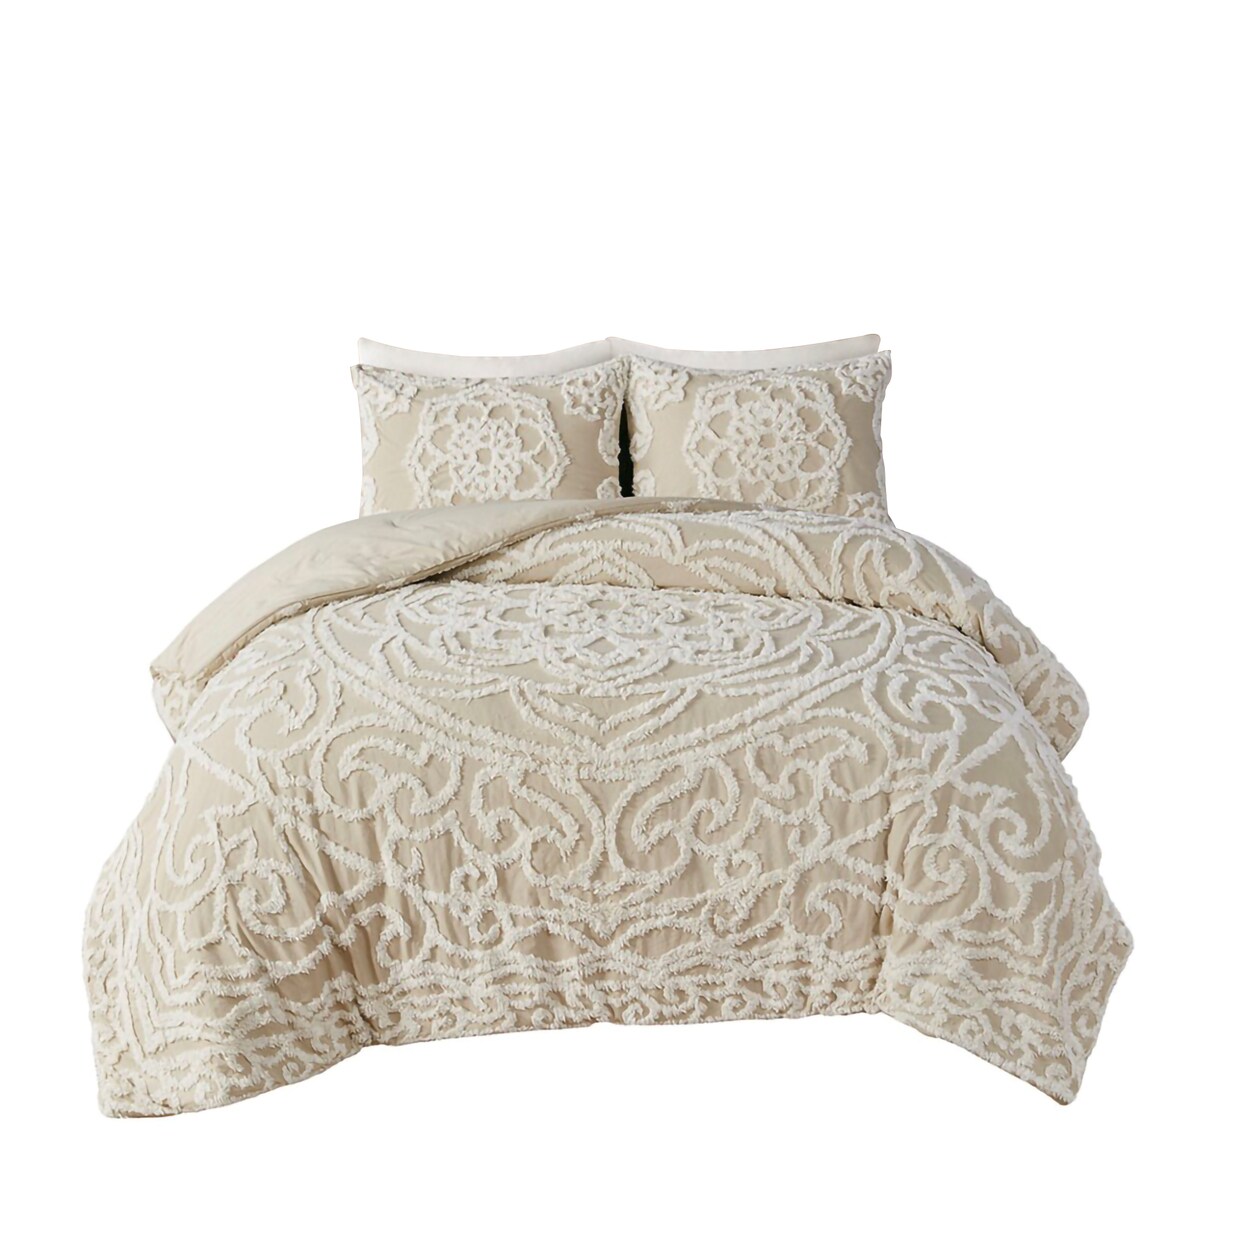 Gracie Mills   Ray 3-Piece Boho-Inspired Tufted Cotton Chenille Medallion Comforter Set - GRACE-11117